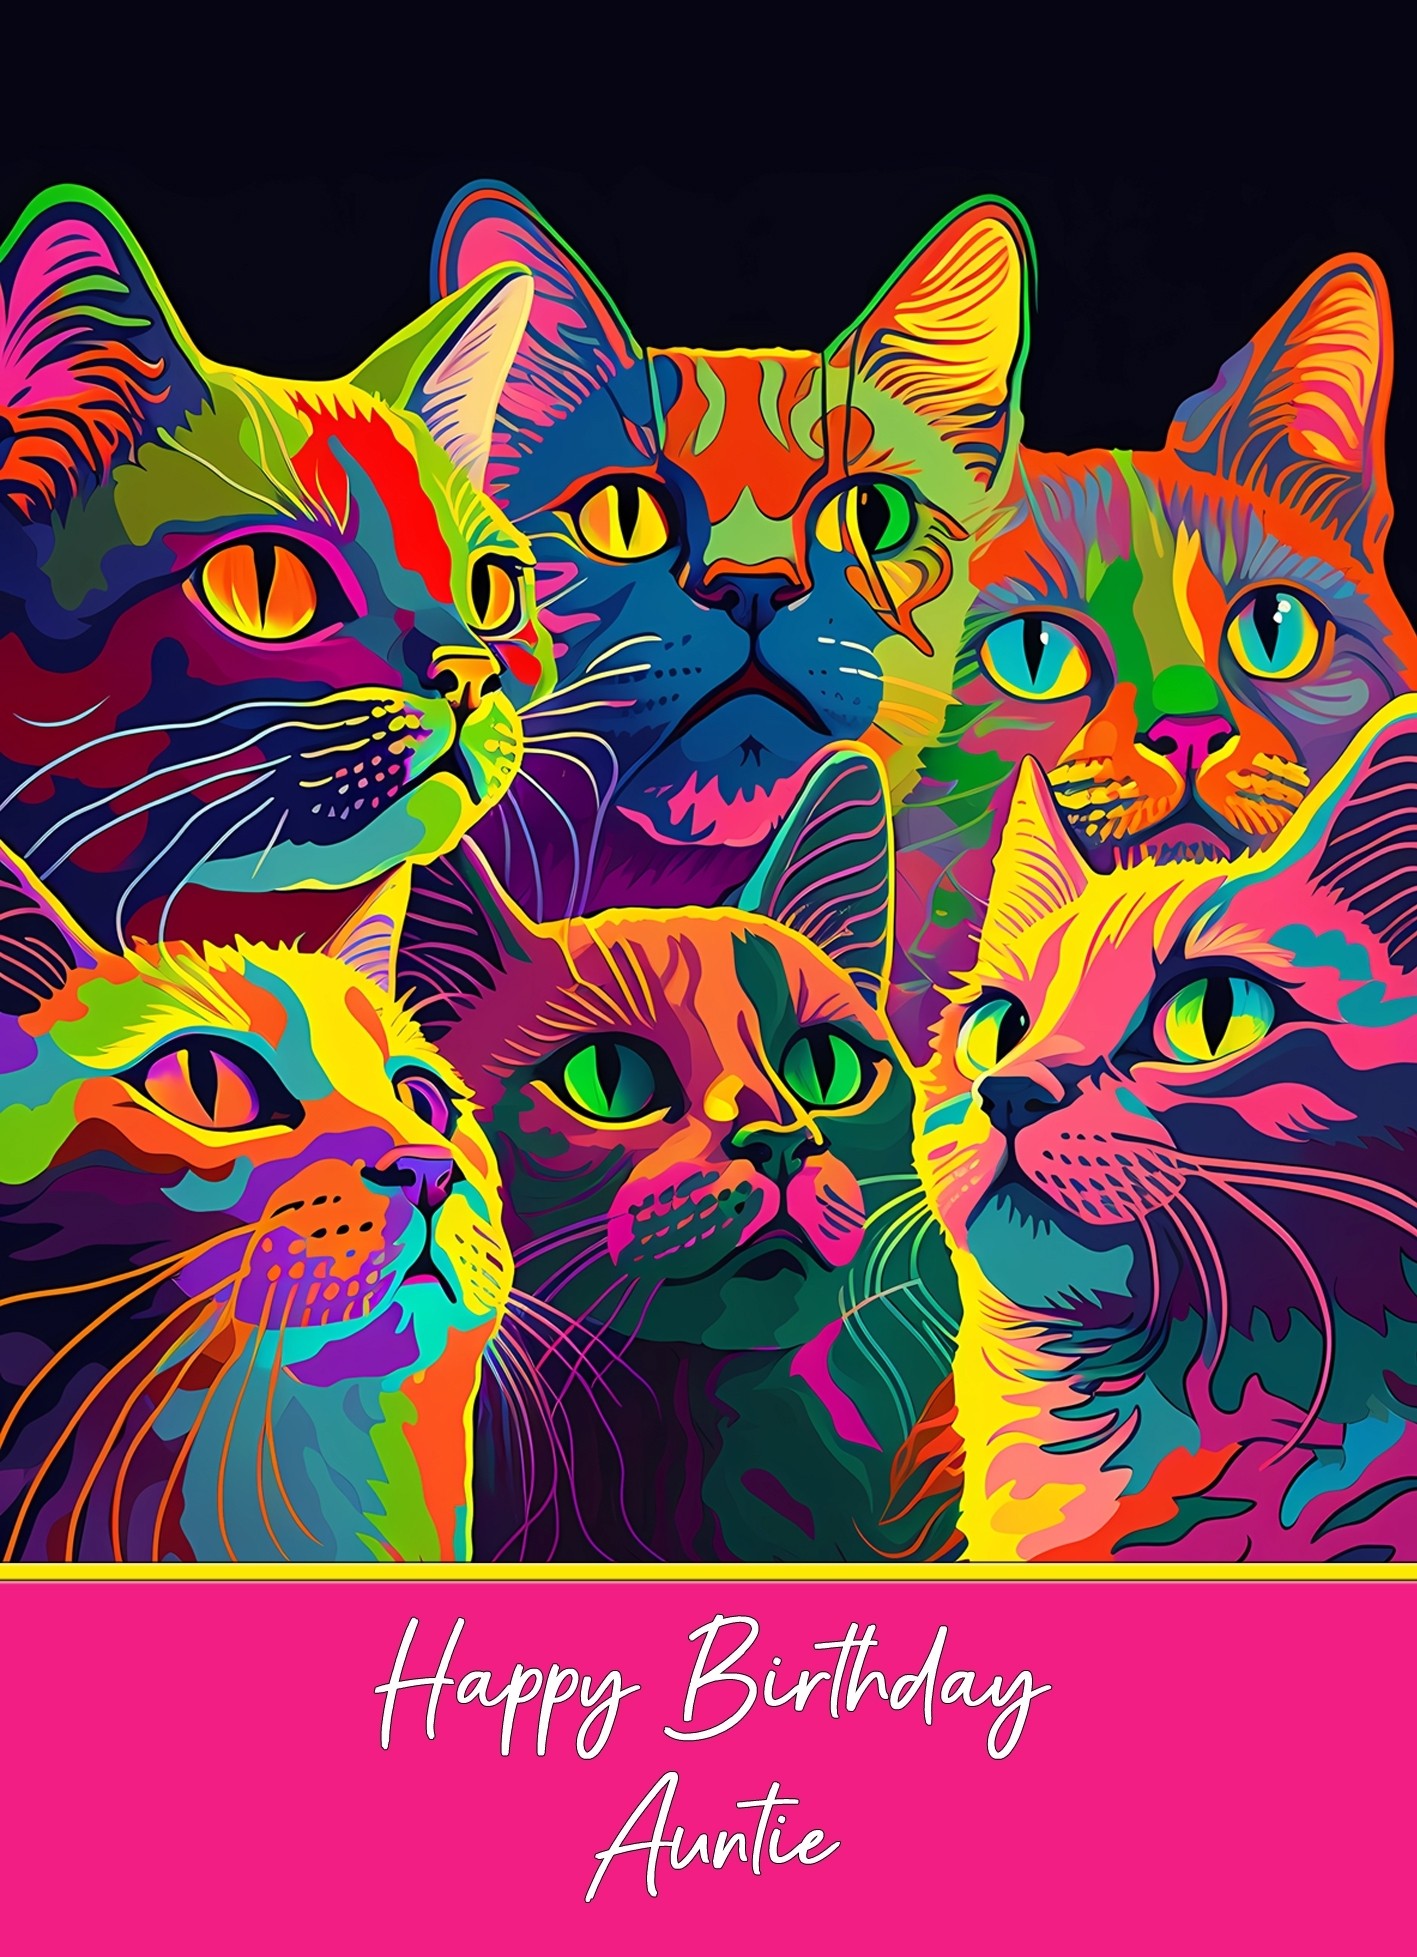 Birthday Card For Auntie (Colourful Cat Art)